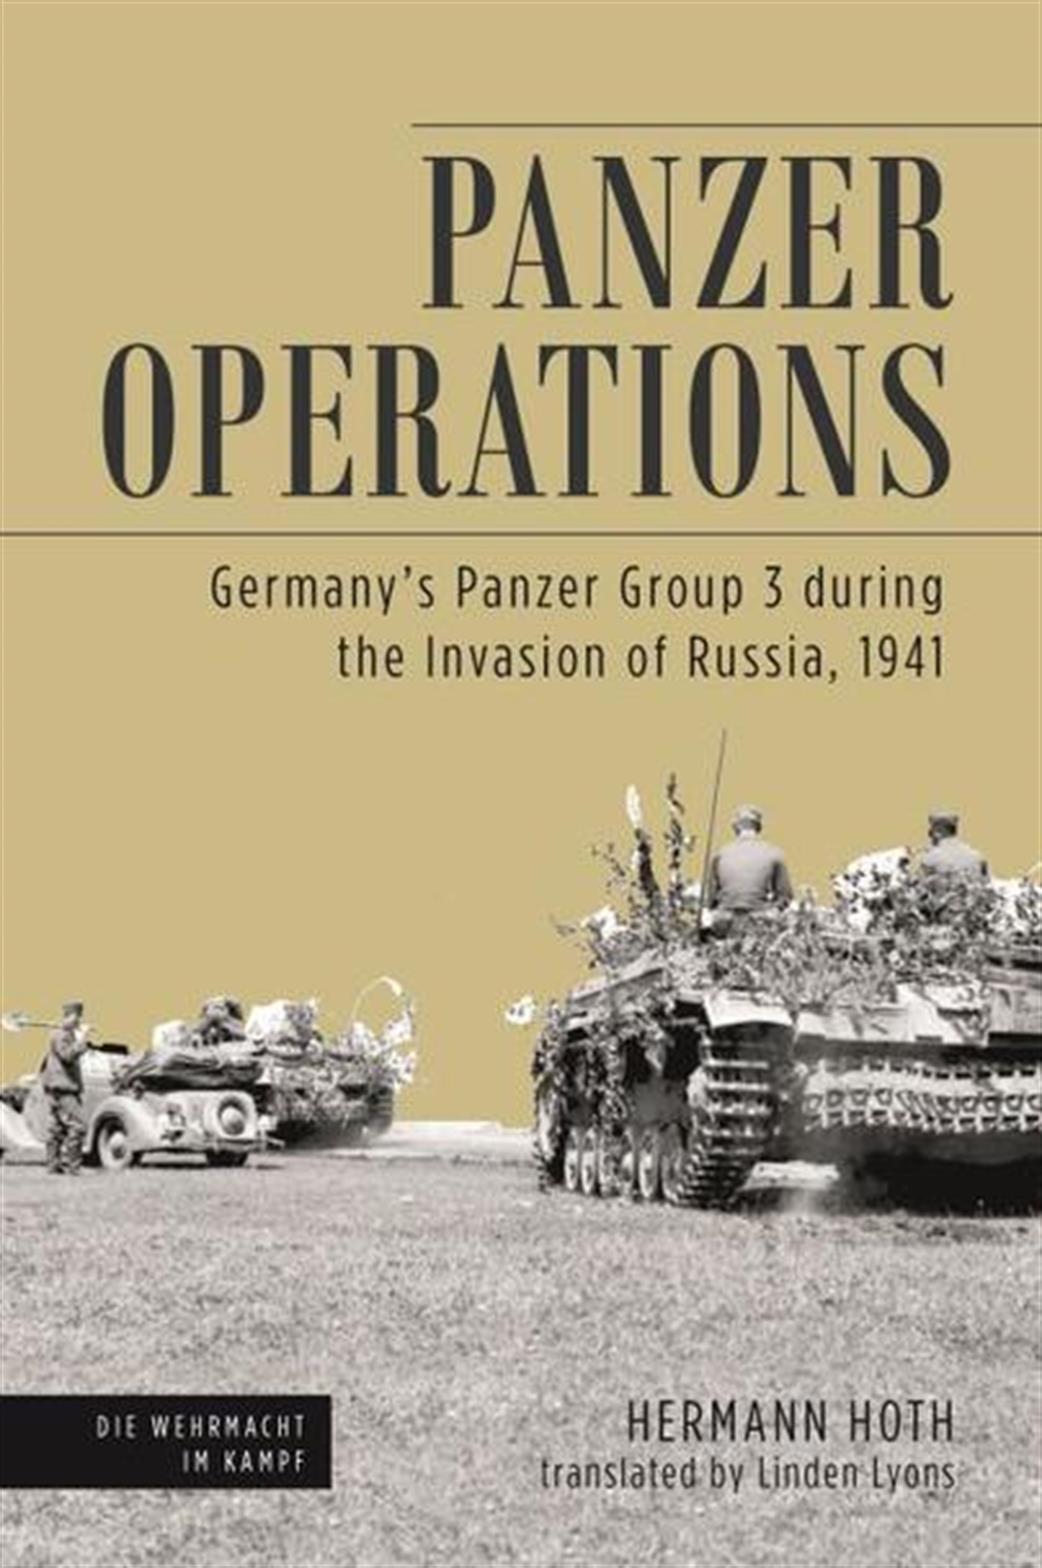 9781612005621 Panzer Operations by Herman Hoth